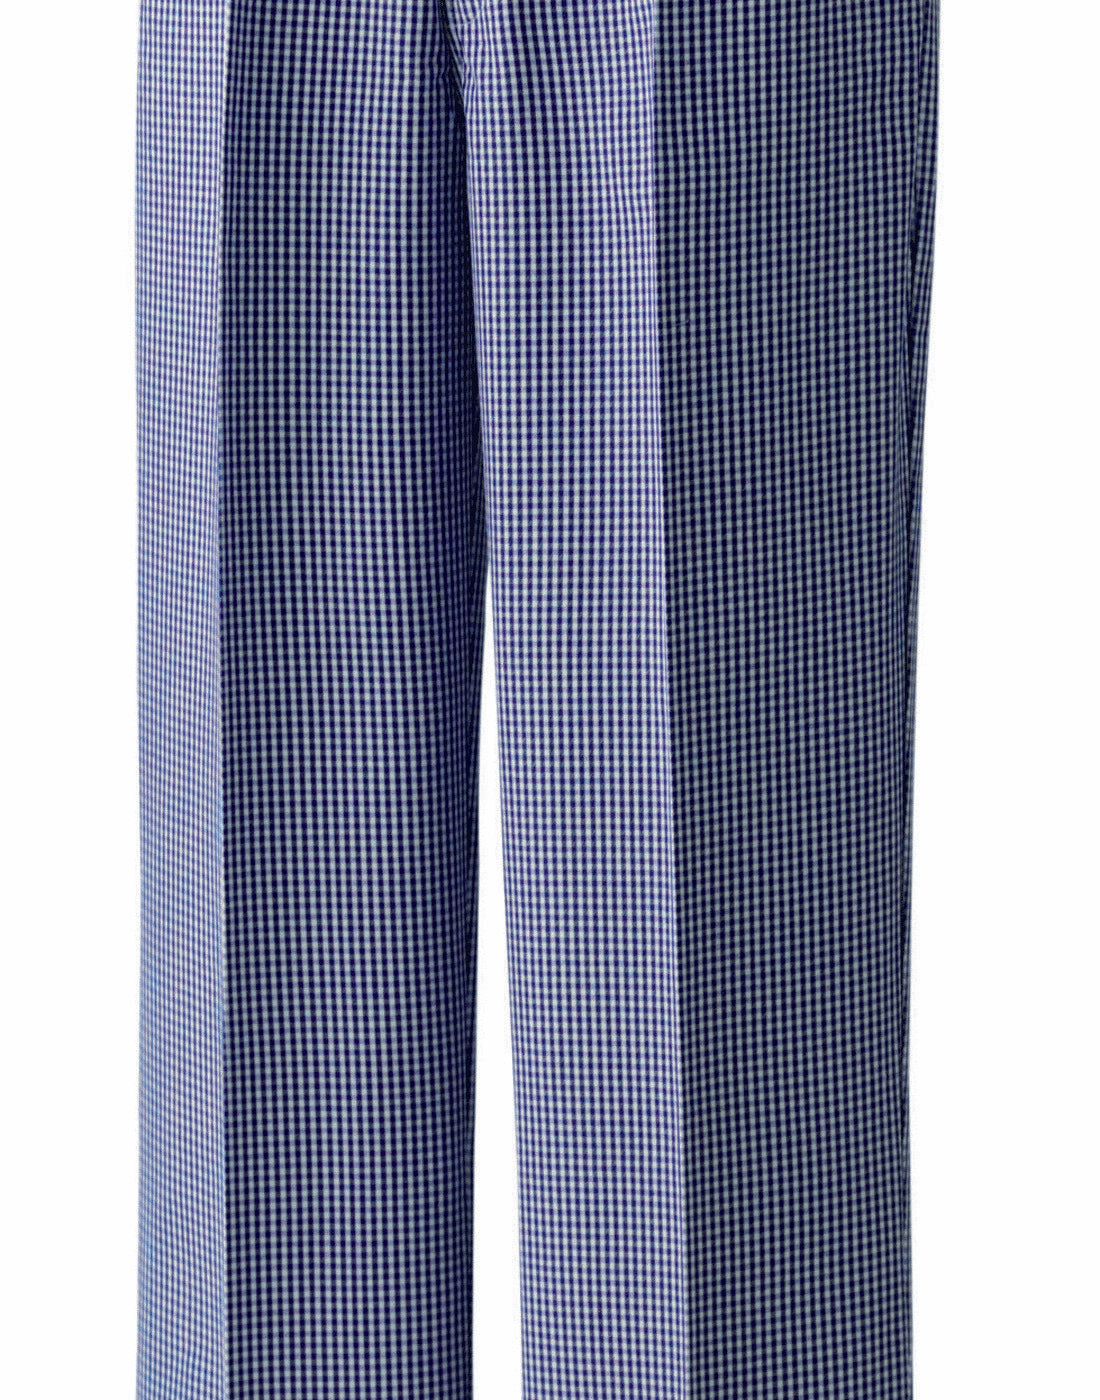 Premier Chef's Pull-on Trousers